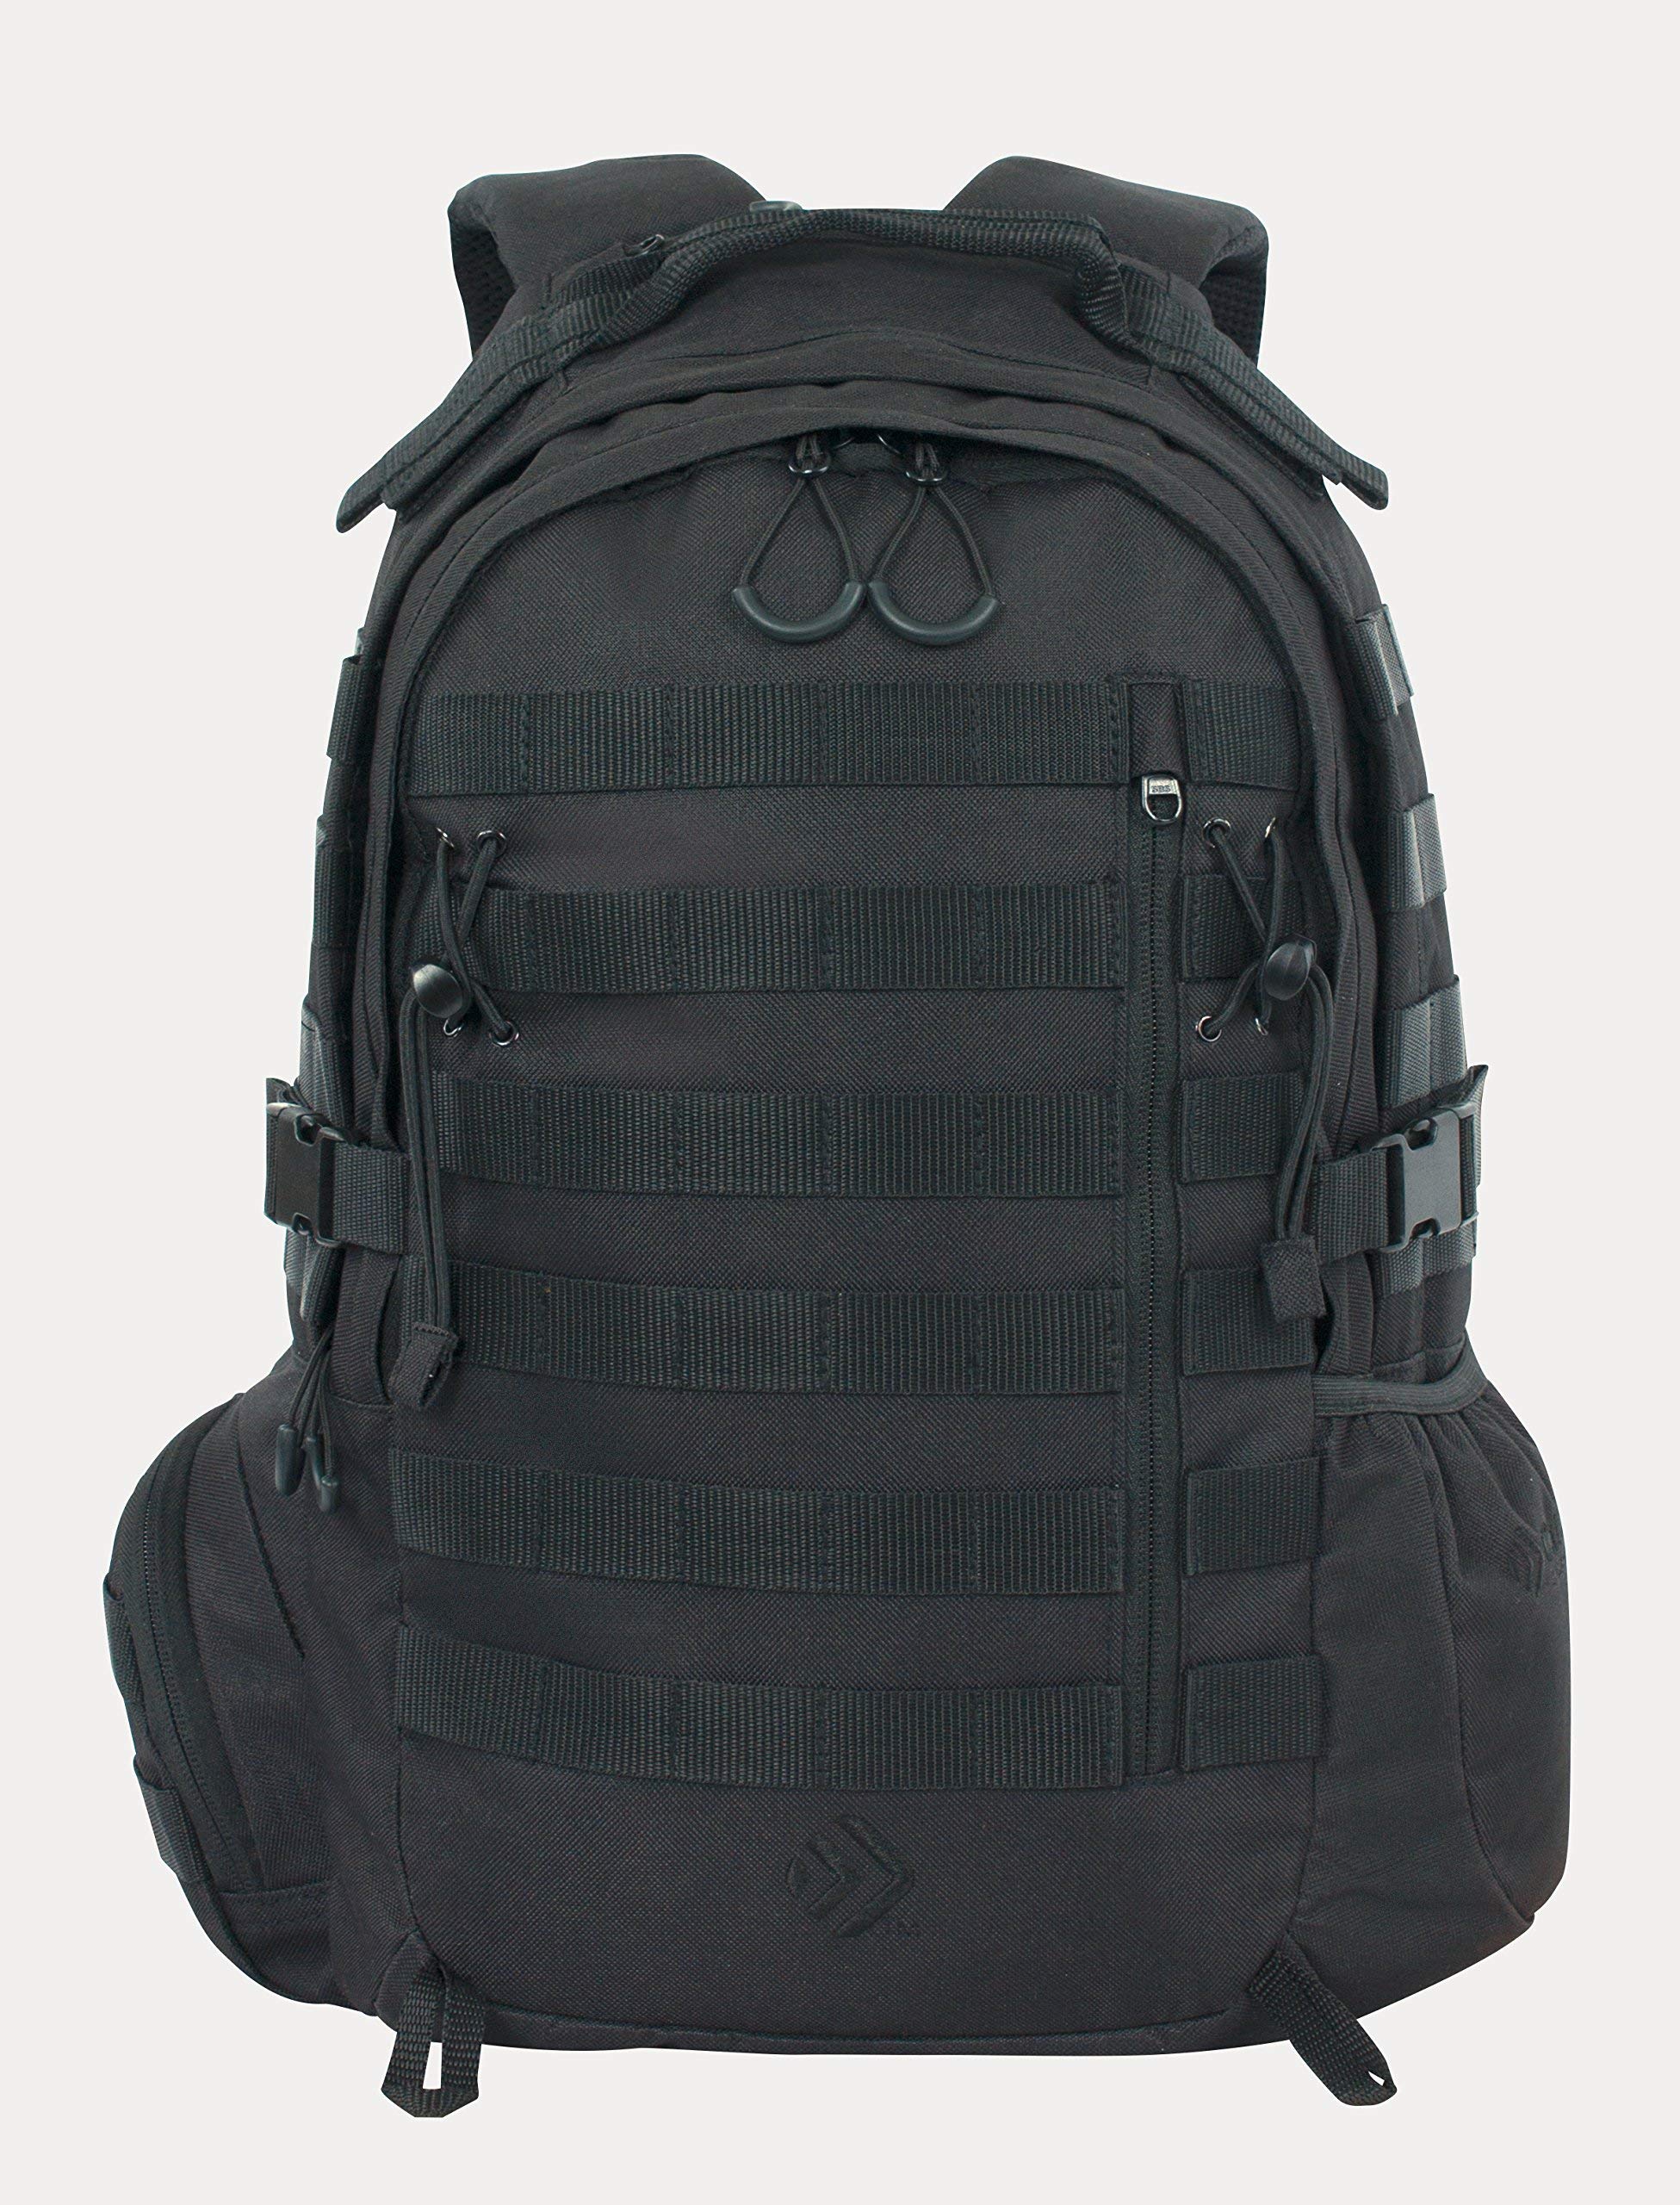 Outdoor Products Quest Day Pack